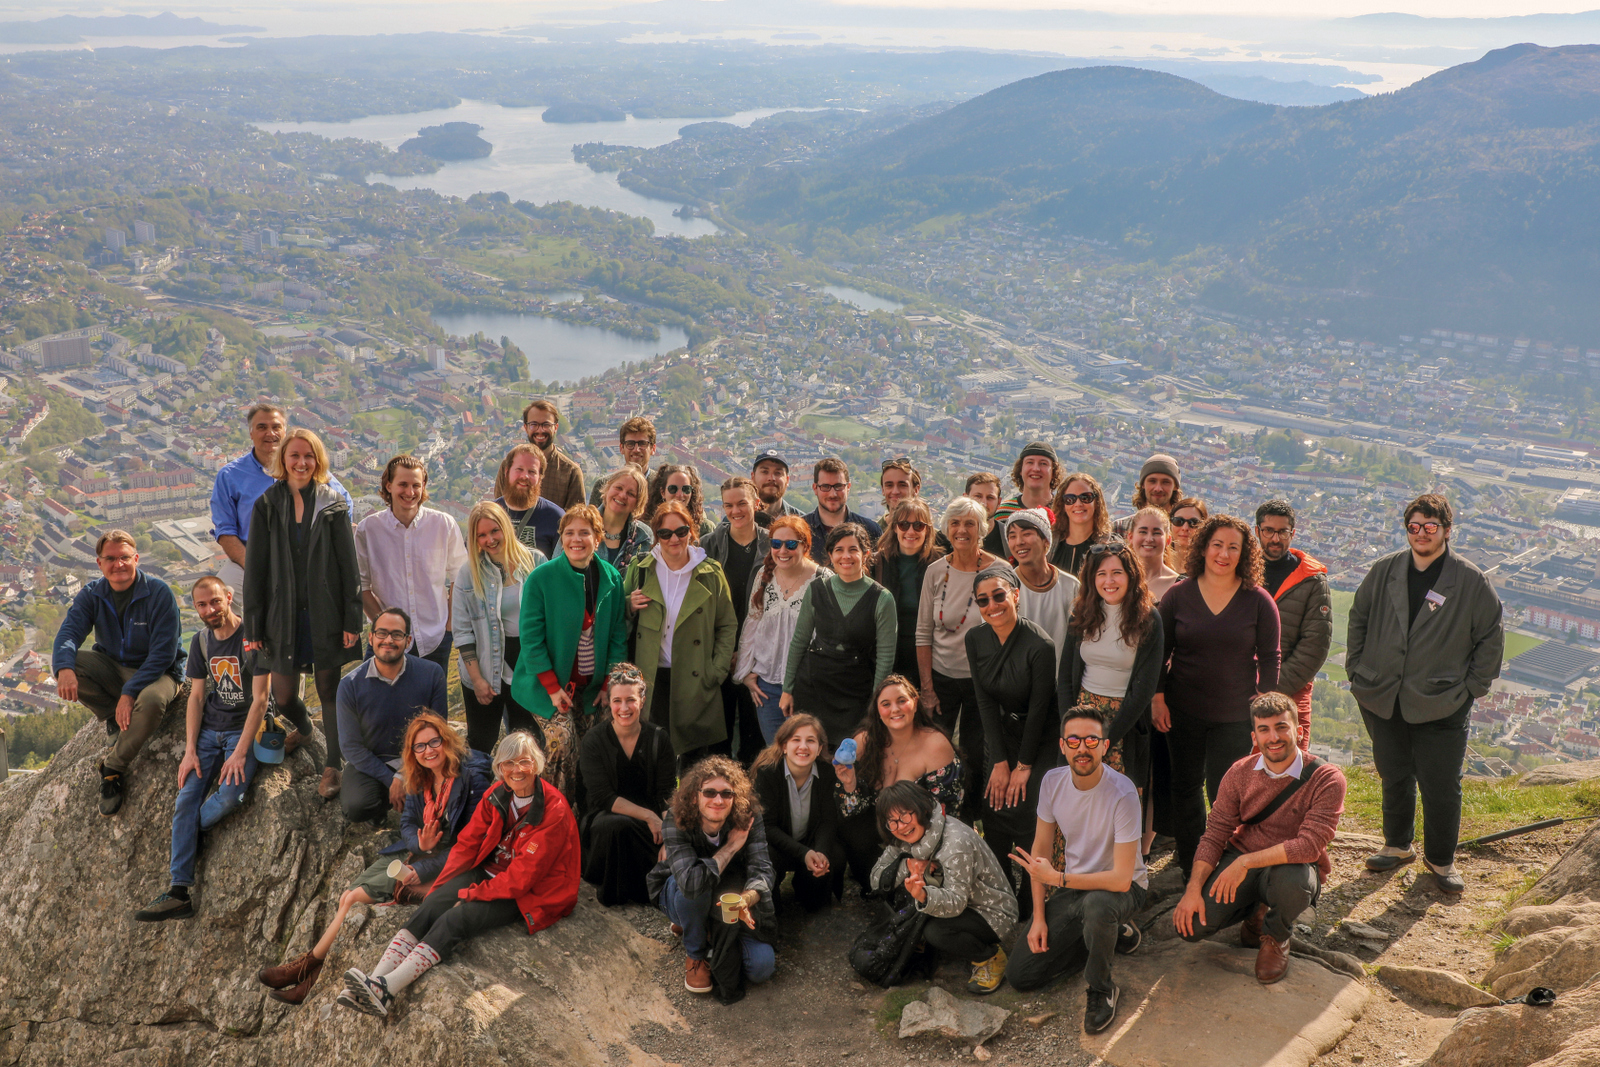 Group photo of the participants up in the mountains, with the city of Bergen in the background